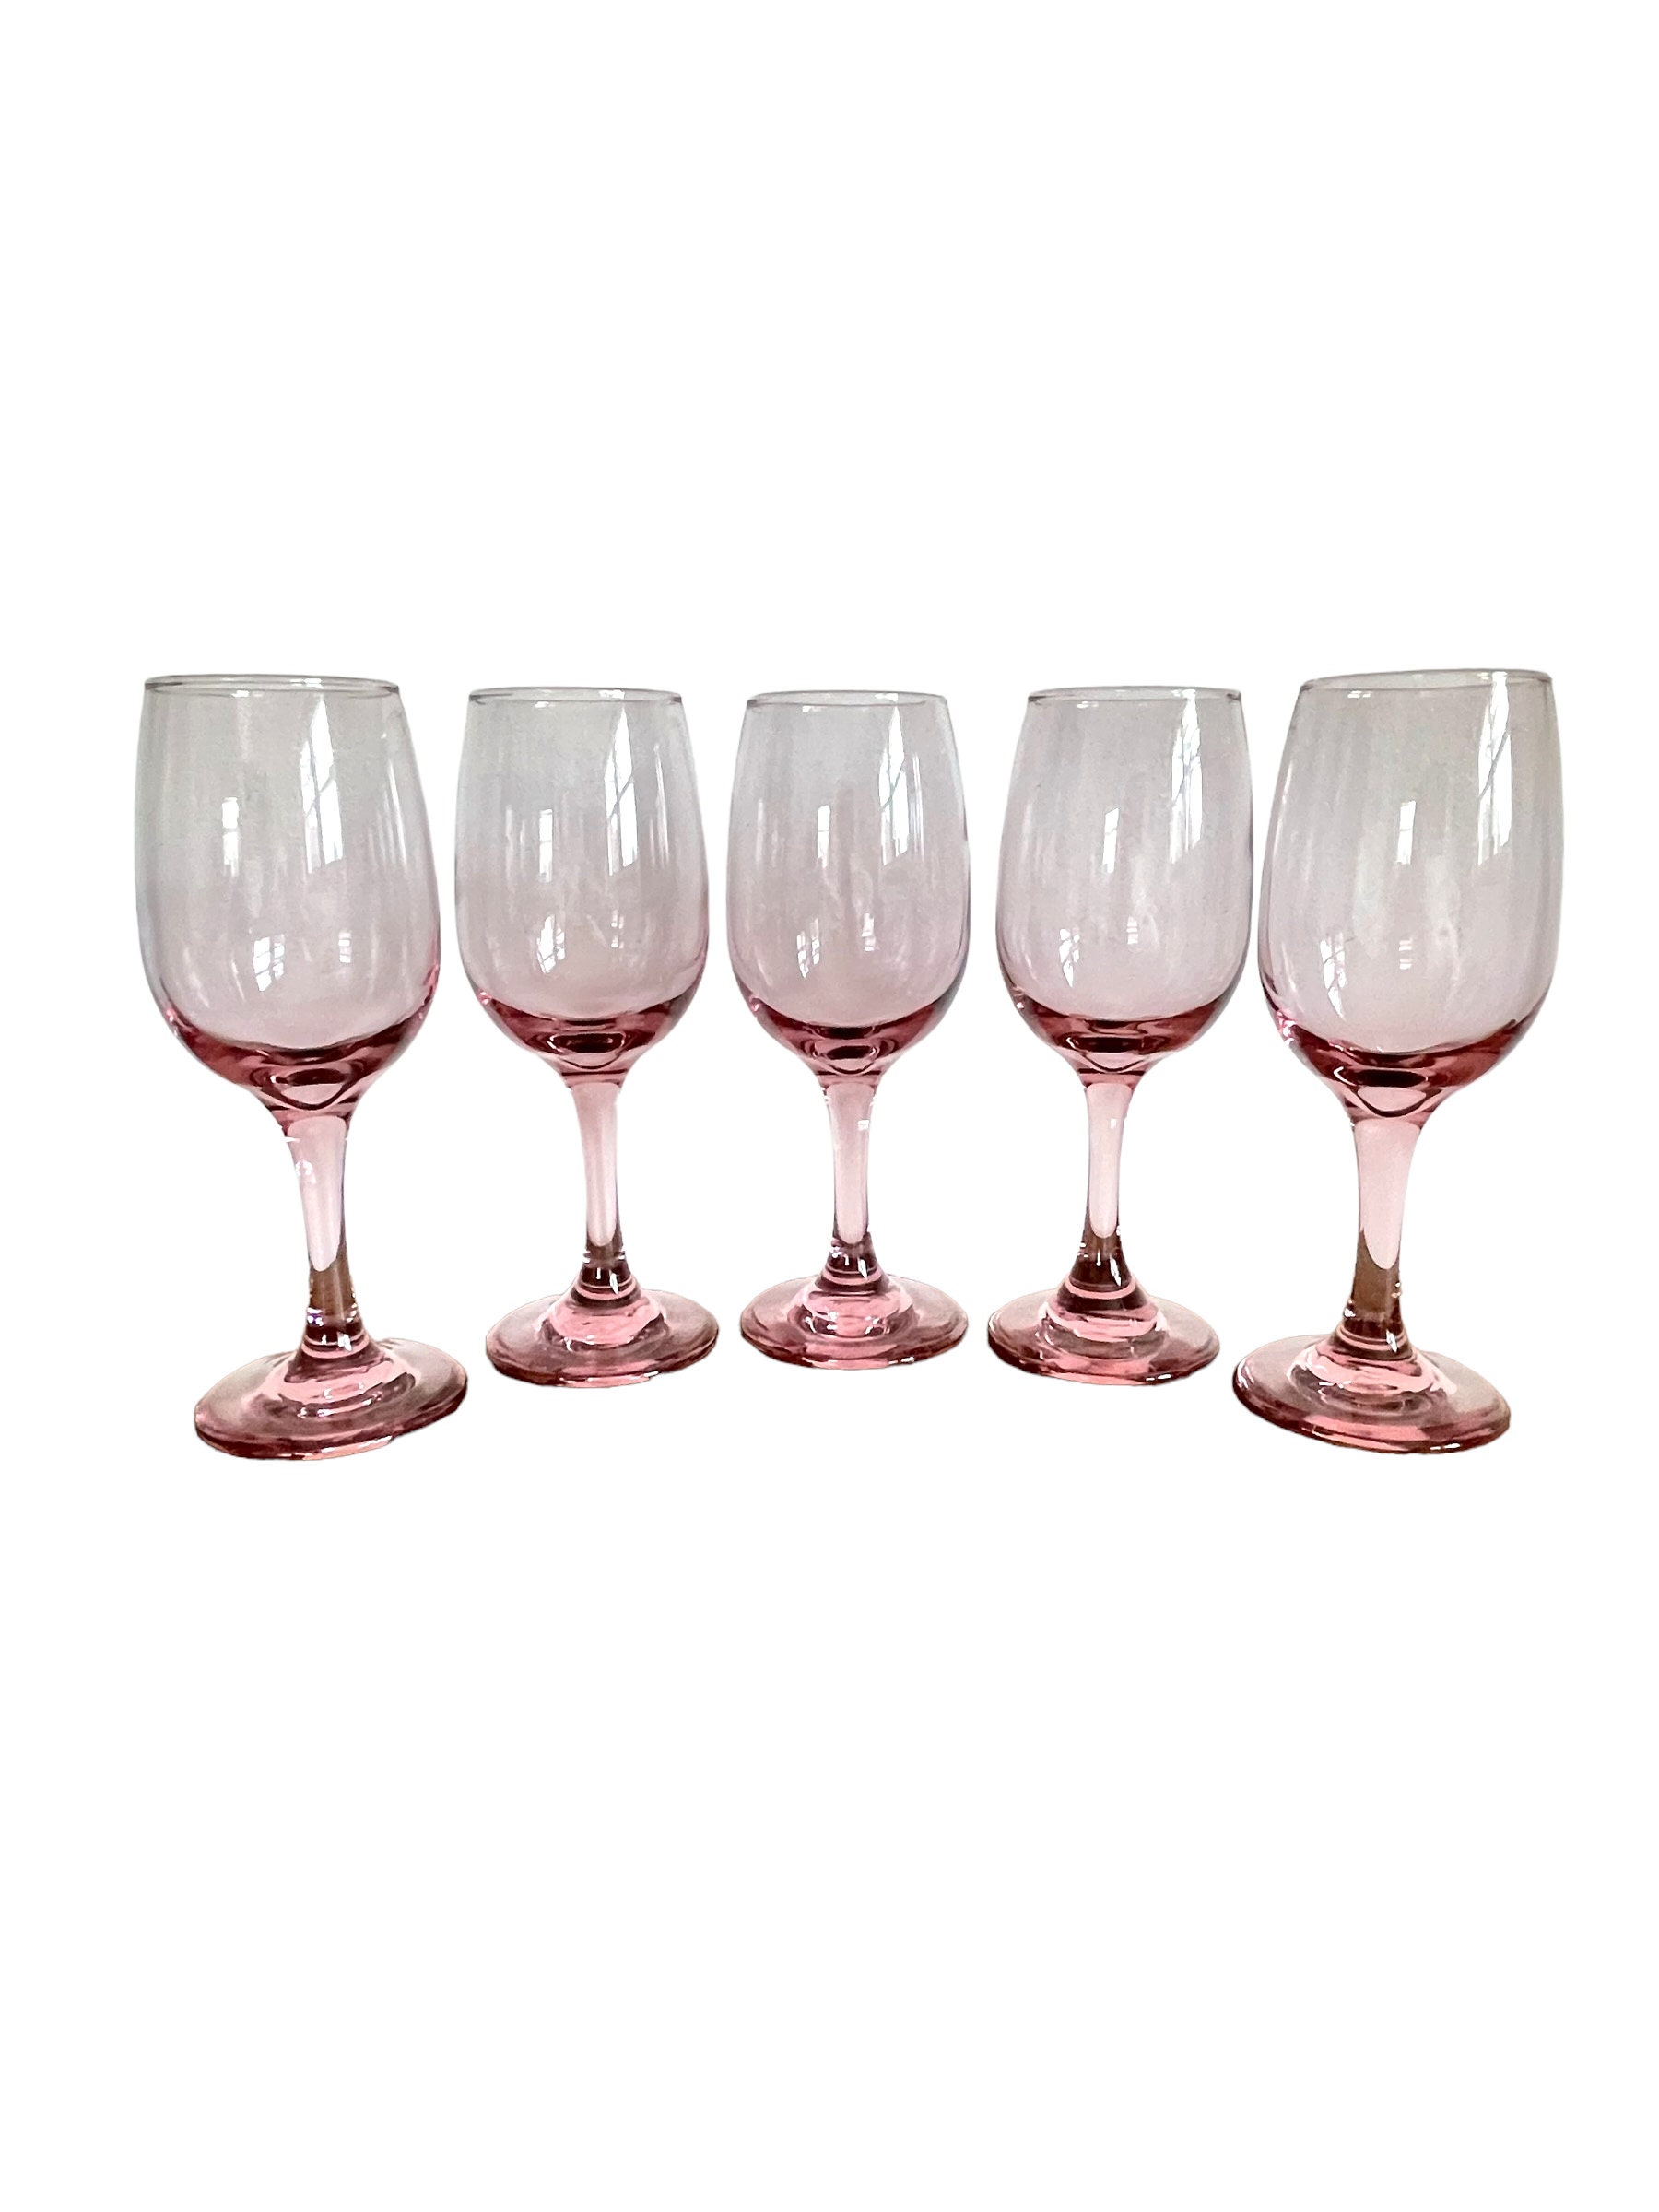 Libbey Plum/pink Wine Glasses Set of 4 11 Oz. 7 1/8 Tall Two Sets